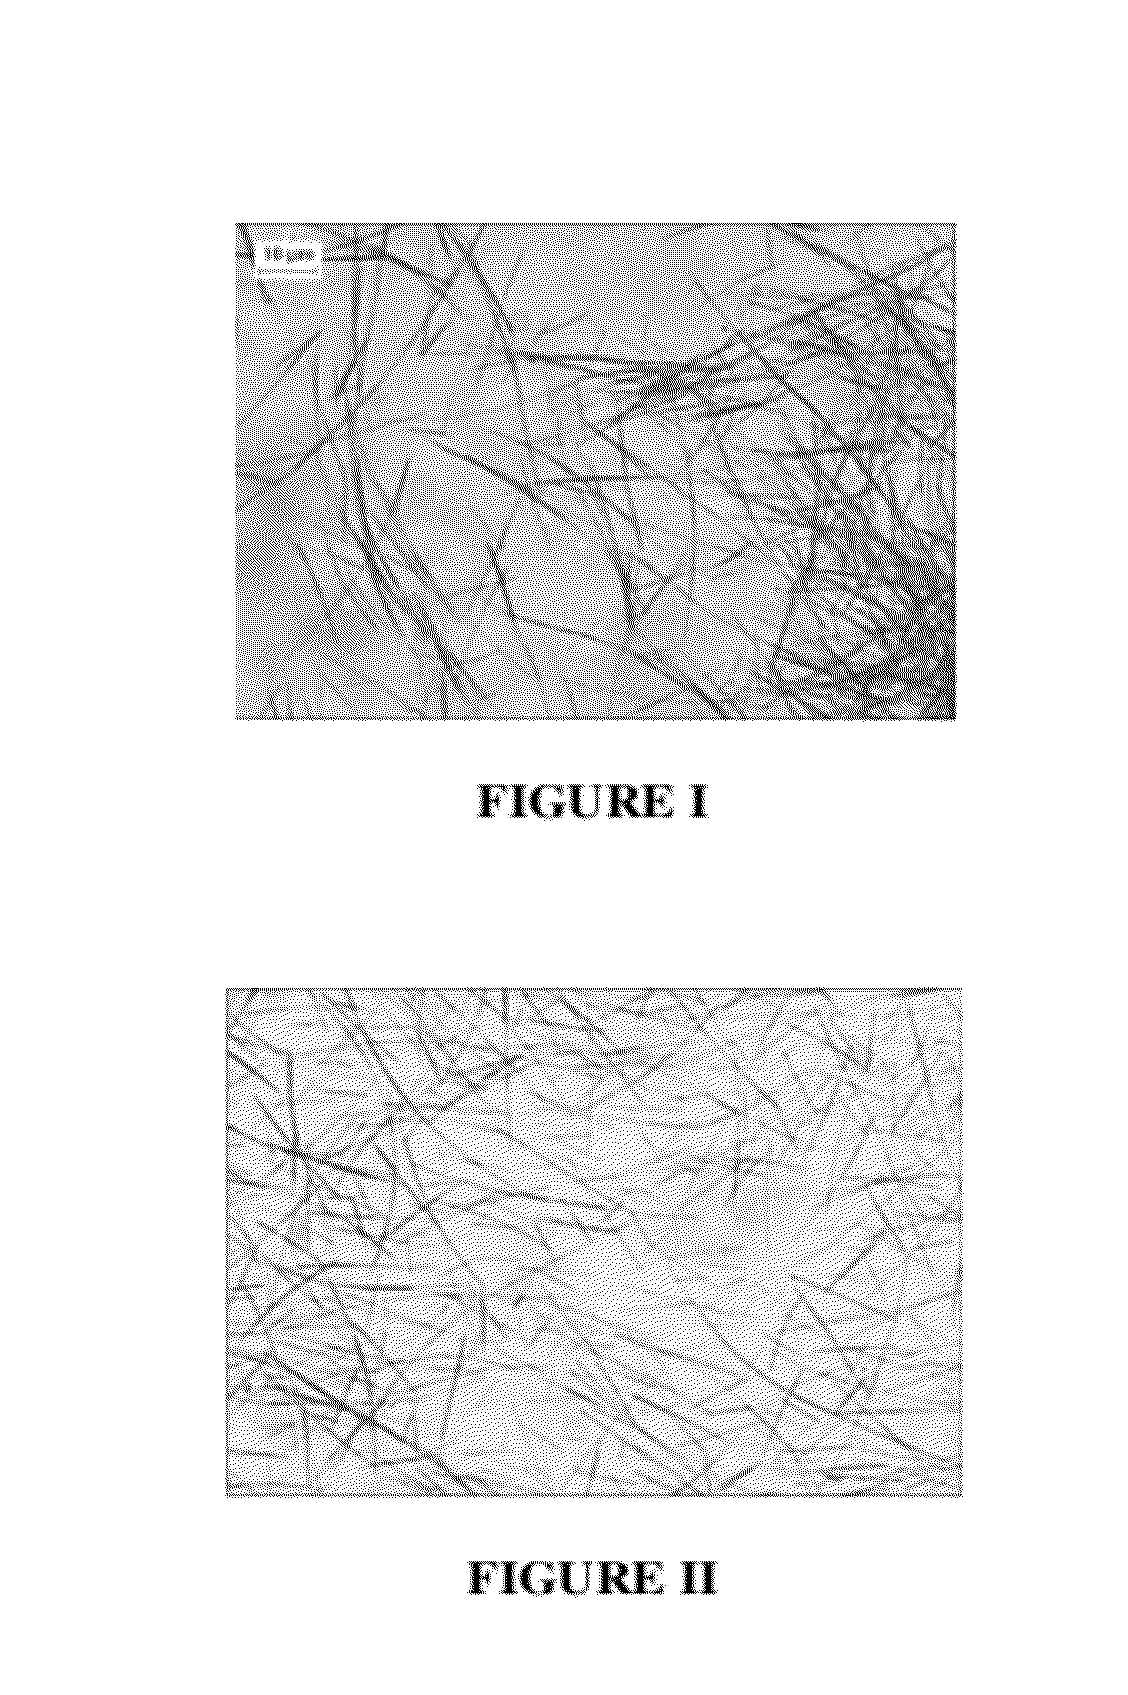 Transparent conductive film comprising water soluble binders